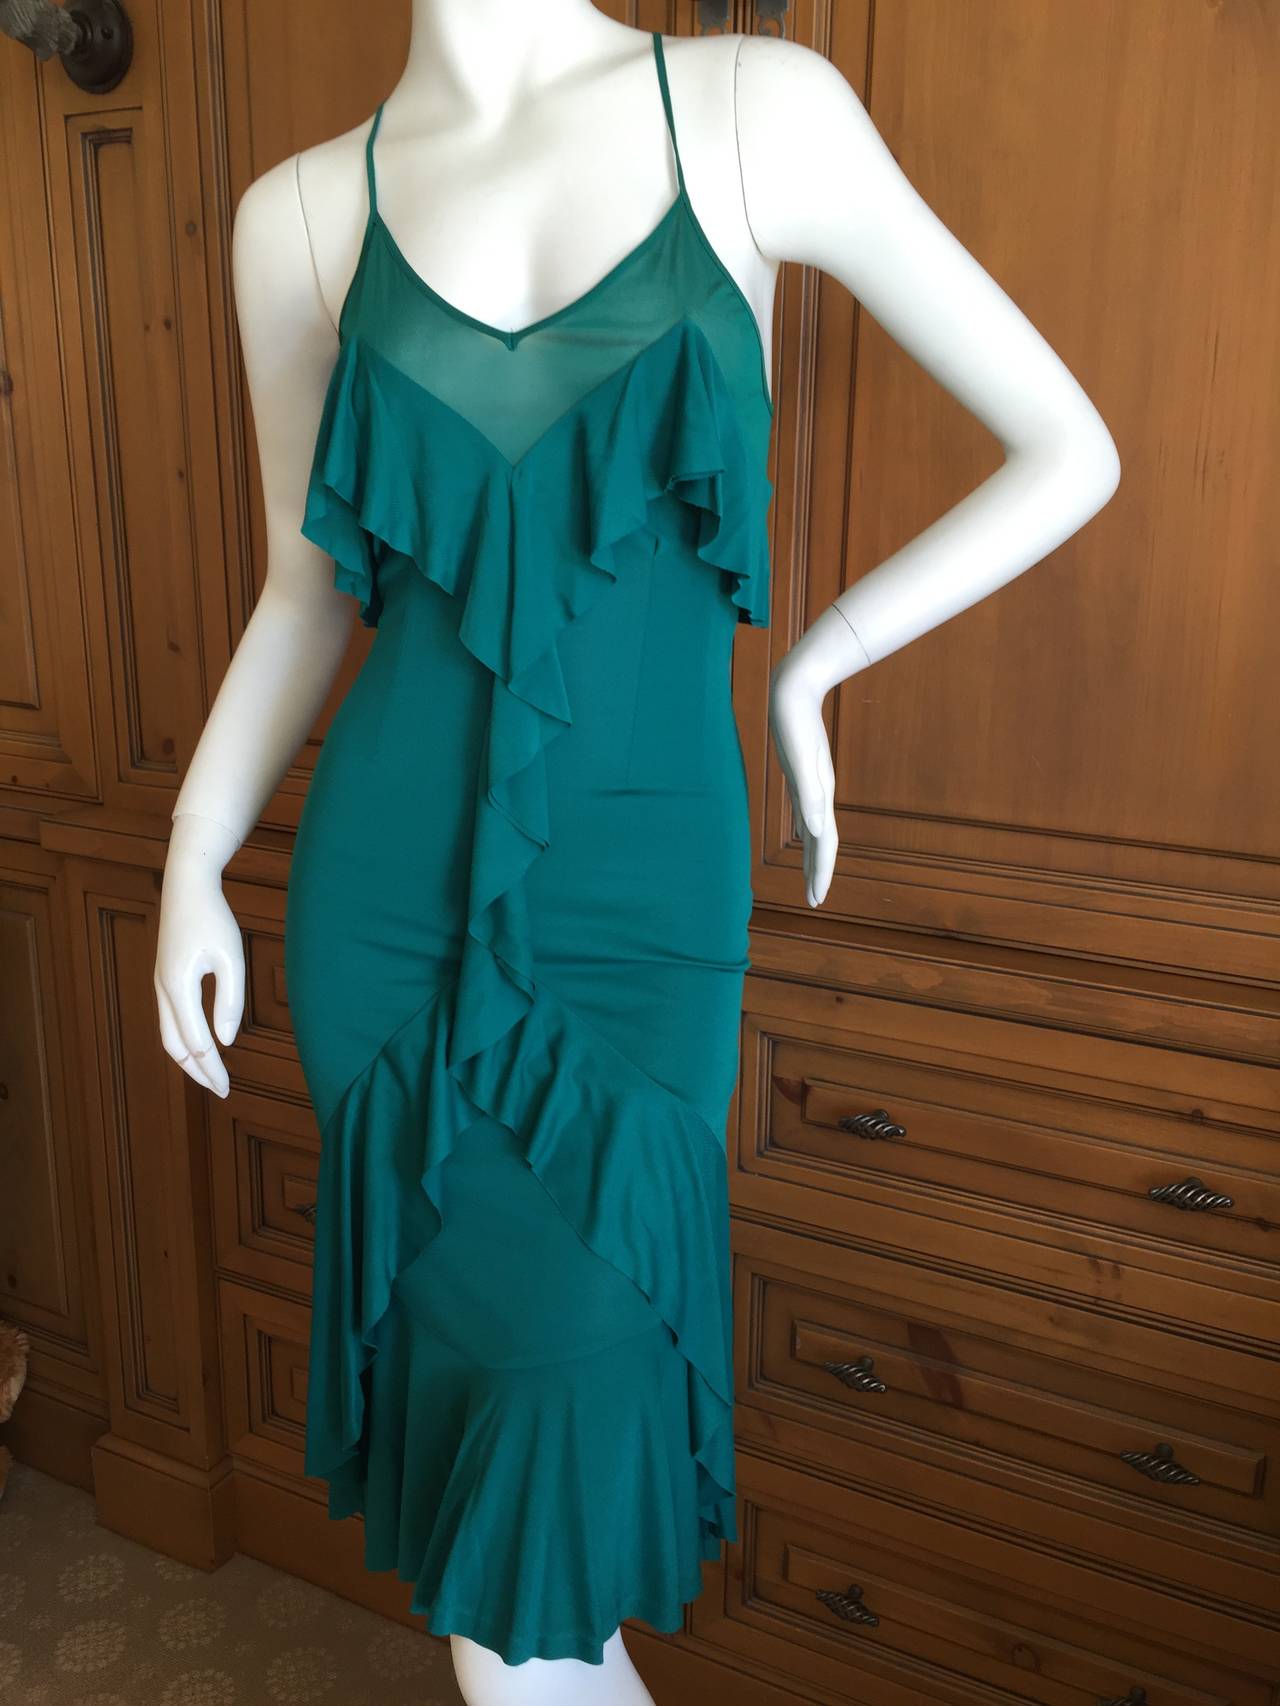 Yves Saint Laurent by Tom Ford 2002 Silk Ruffle Dress For Sale 2